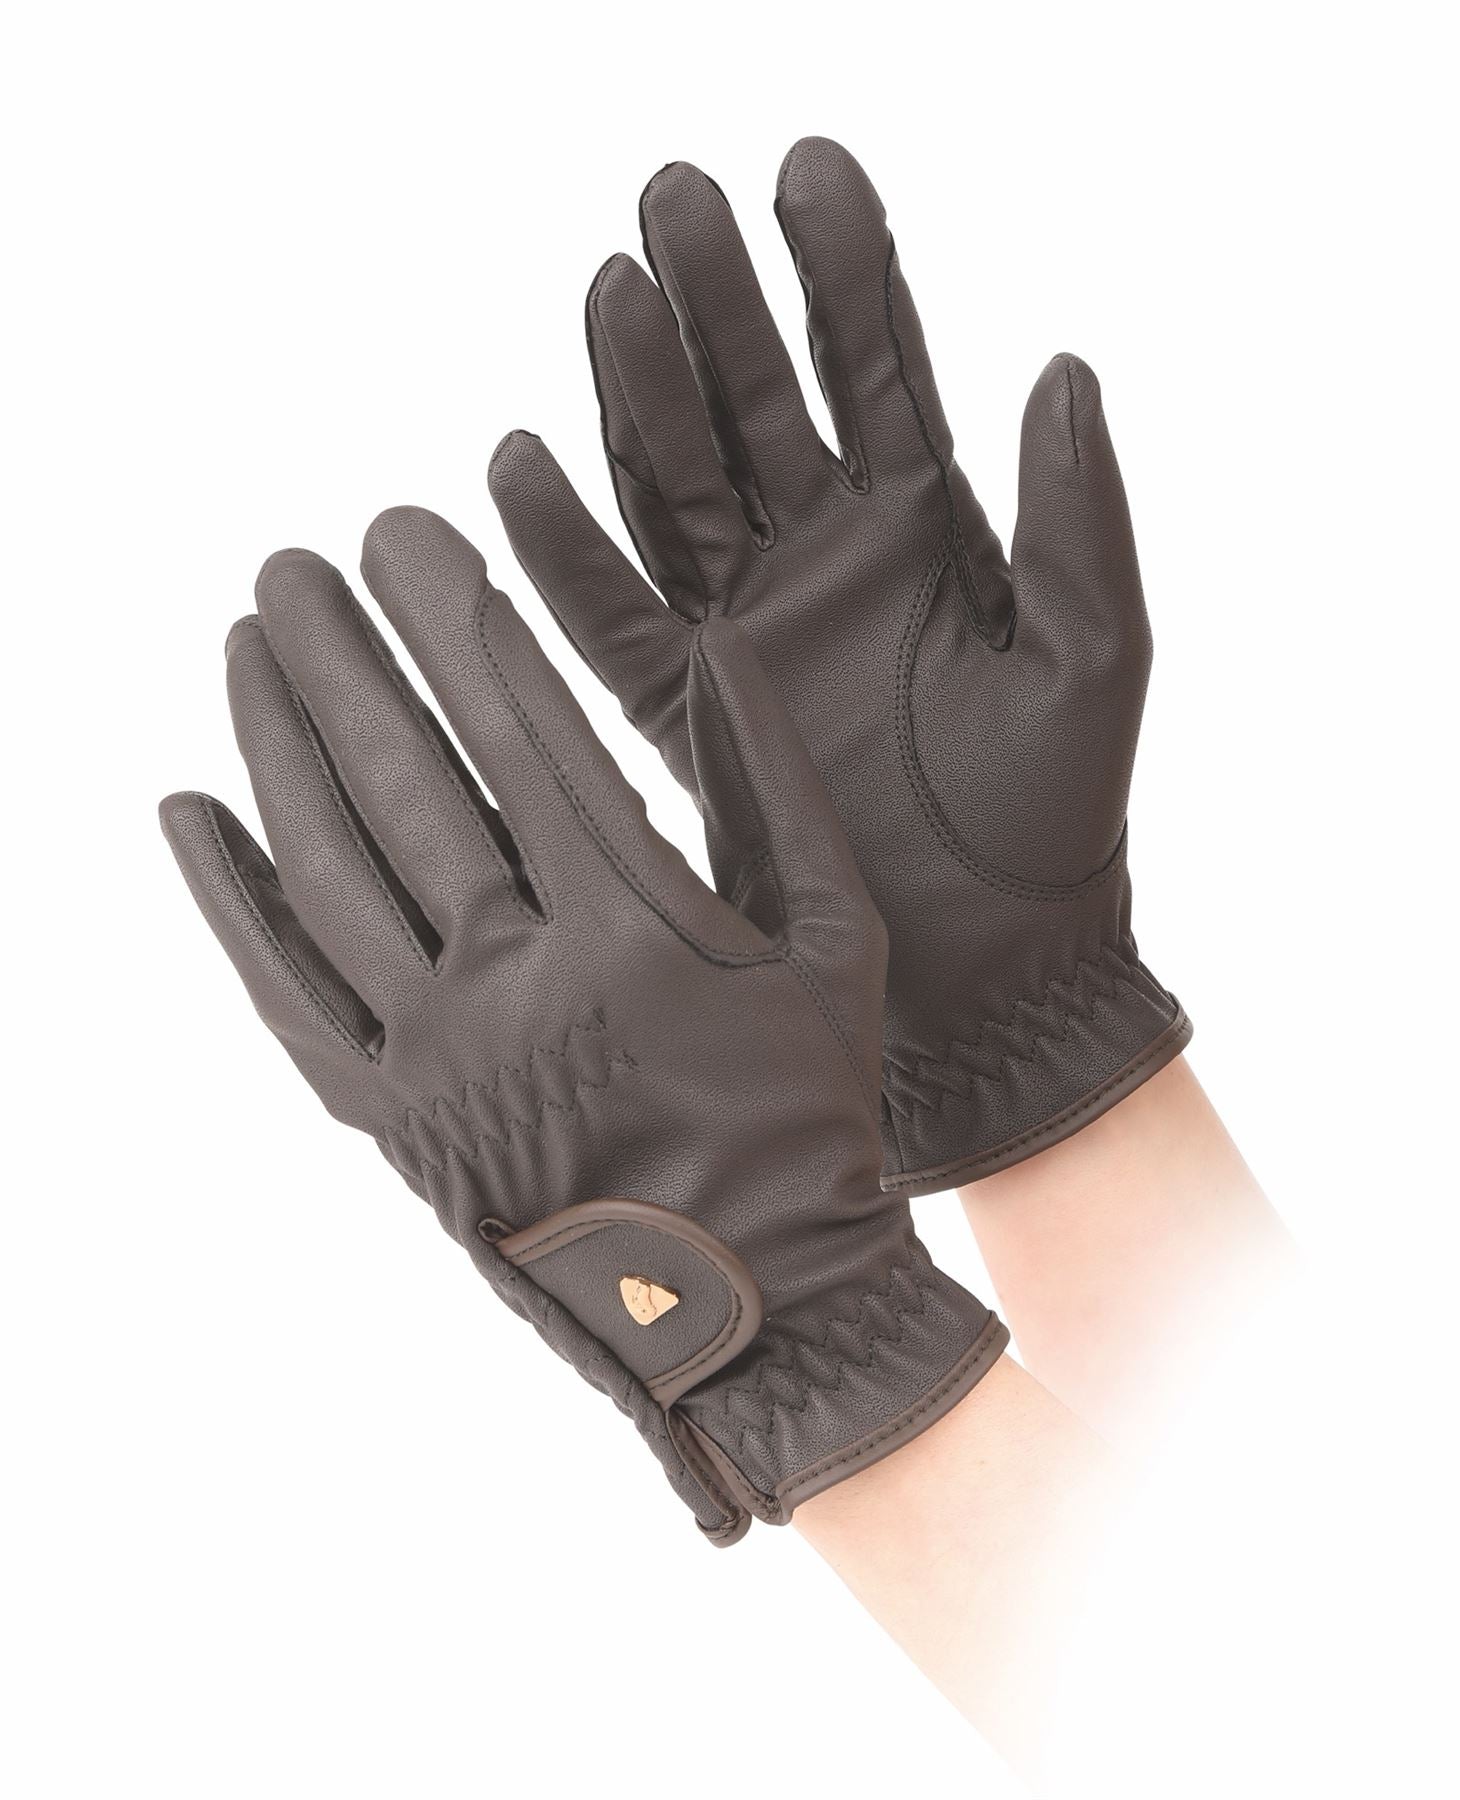 Shires Aubrion Pu Riding Gloves - Just Horse Riders